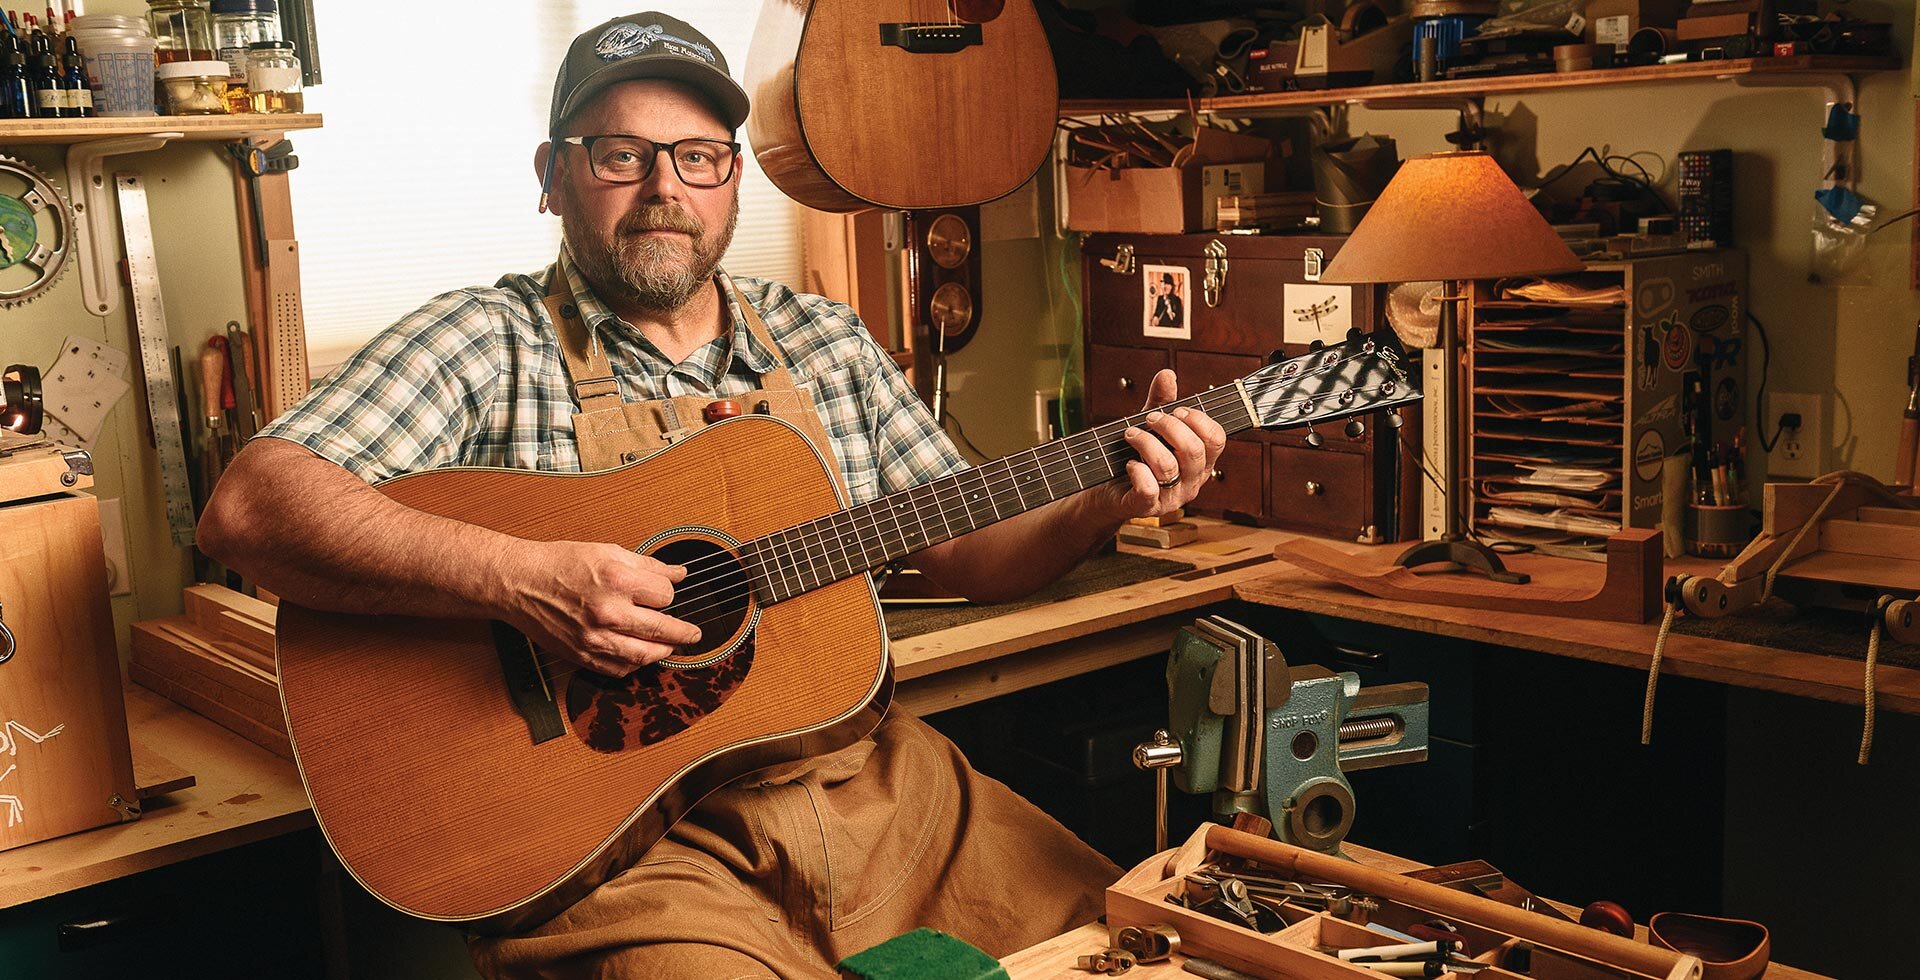 Kurt taught himself how to build guitars and mandolins. He’s now an expert luthier who creates one-of-a-kind instruments for musicians looking for the utmost in craftmanship and quality.